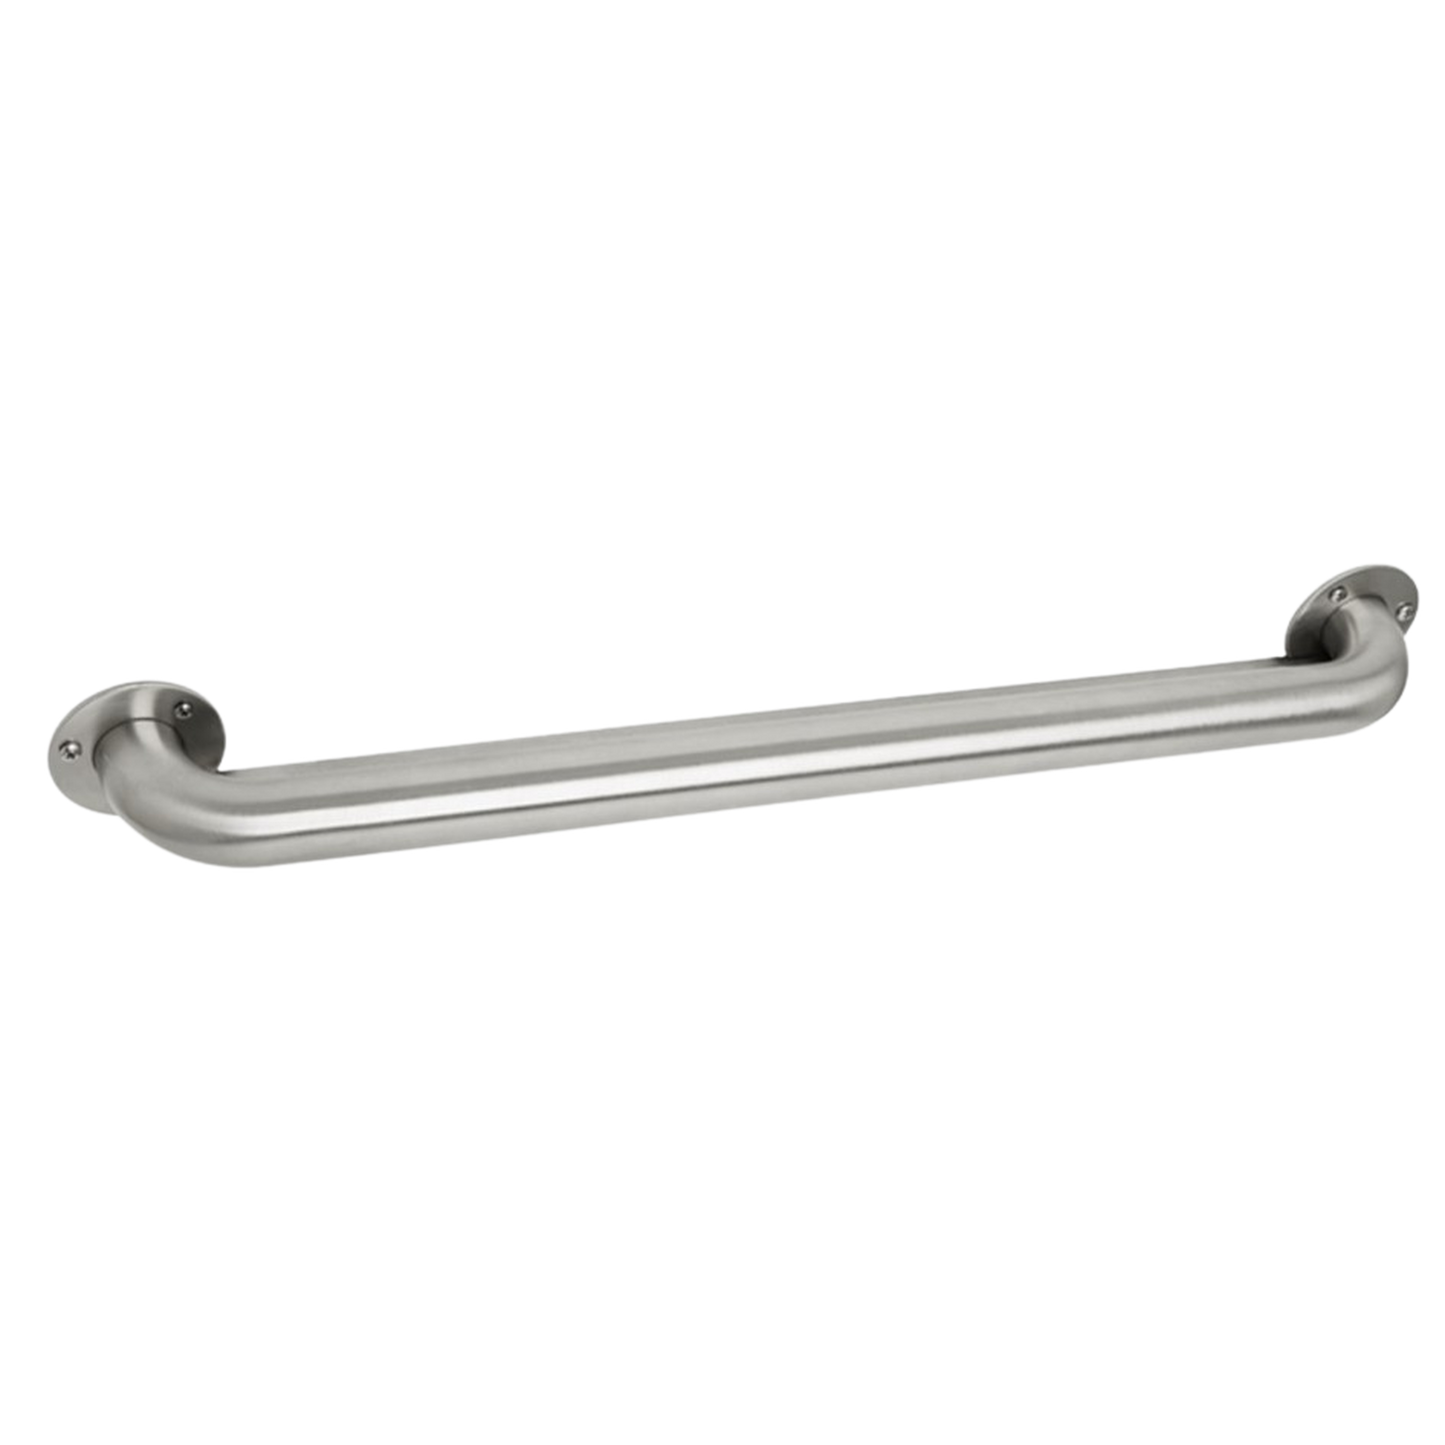 Seachrome Signature Series 32" Satin Stainless Steel 1.5 Diameter Exposed 3-Hole Mounting Flange Switch Weld Standard Ligature Resistant Grab Bar